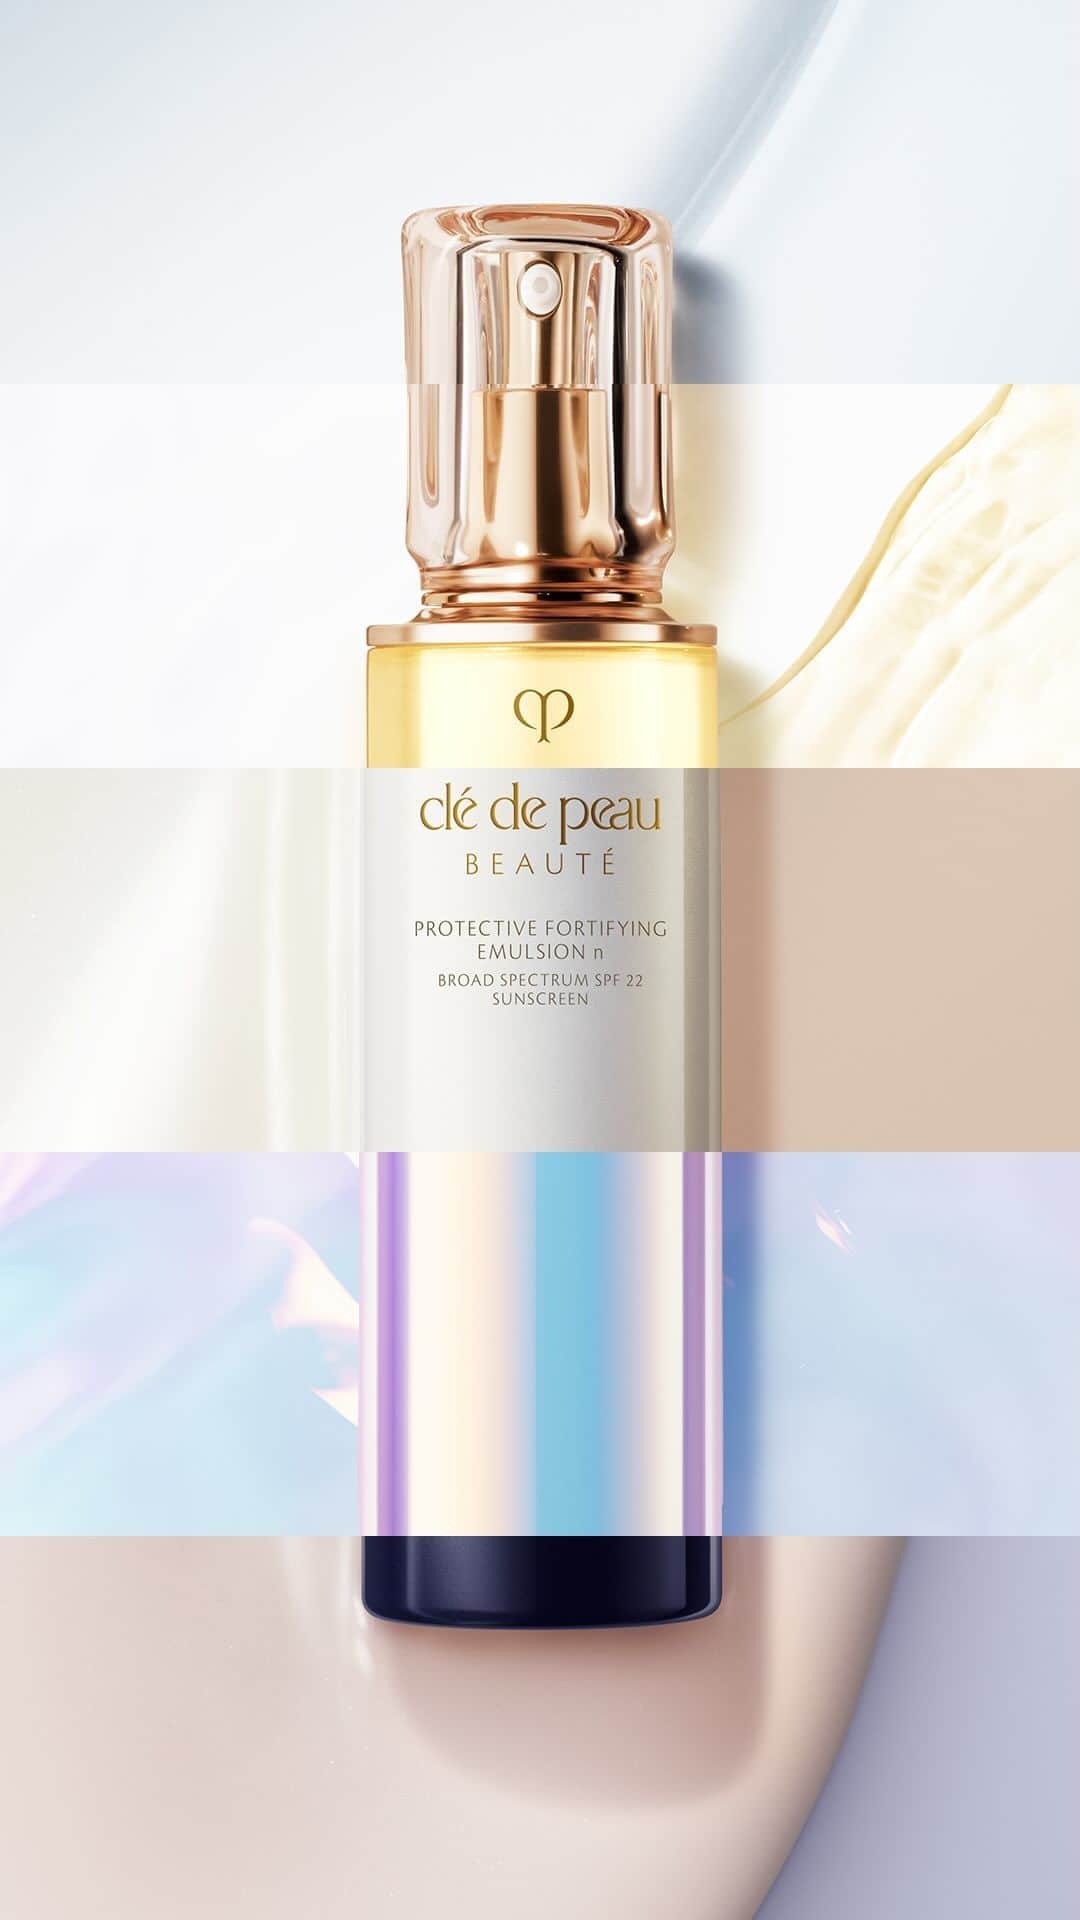 Clé de Peau Beauté Officialのインスタグラム：「Give your skin the pampering it deserves with our luxurious #KeyRadianceCare range of products. From the exquisitely silky texture of #TheSerum and the lightweight, airy texture of our lotions to the rich consistency of the creams, each product in the series is carefully researched and formulated to give you that radiant glow ✨   ラグジュアリーな #キーラディアンスケア で、あなたの肌にあったご褒美を。なめらかさを極めたクレ・ド・ポー ボーテ #ルセラム （医薬部外品）や、みずみずしいうるおいの化粧水、しっとりとしてこくのあるクリーム。 美容液・化粧水・乳液の 3 ステップで輝き続ける肌を目指します✨」